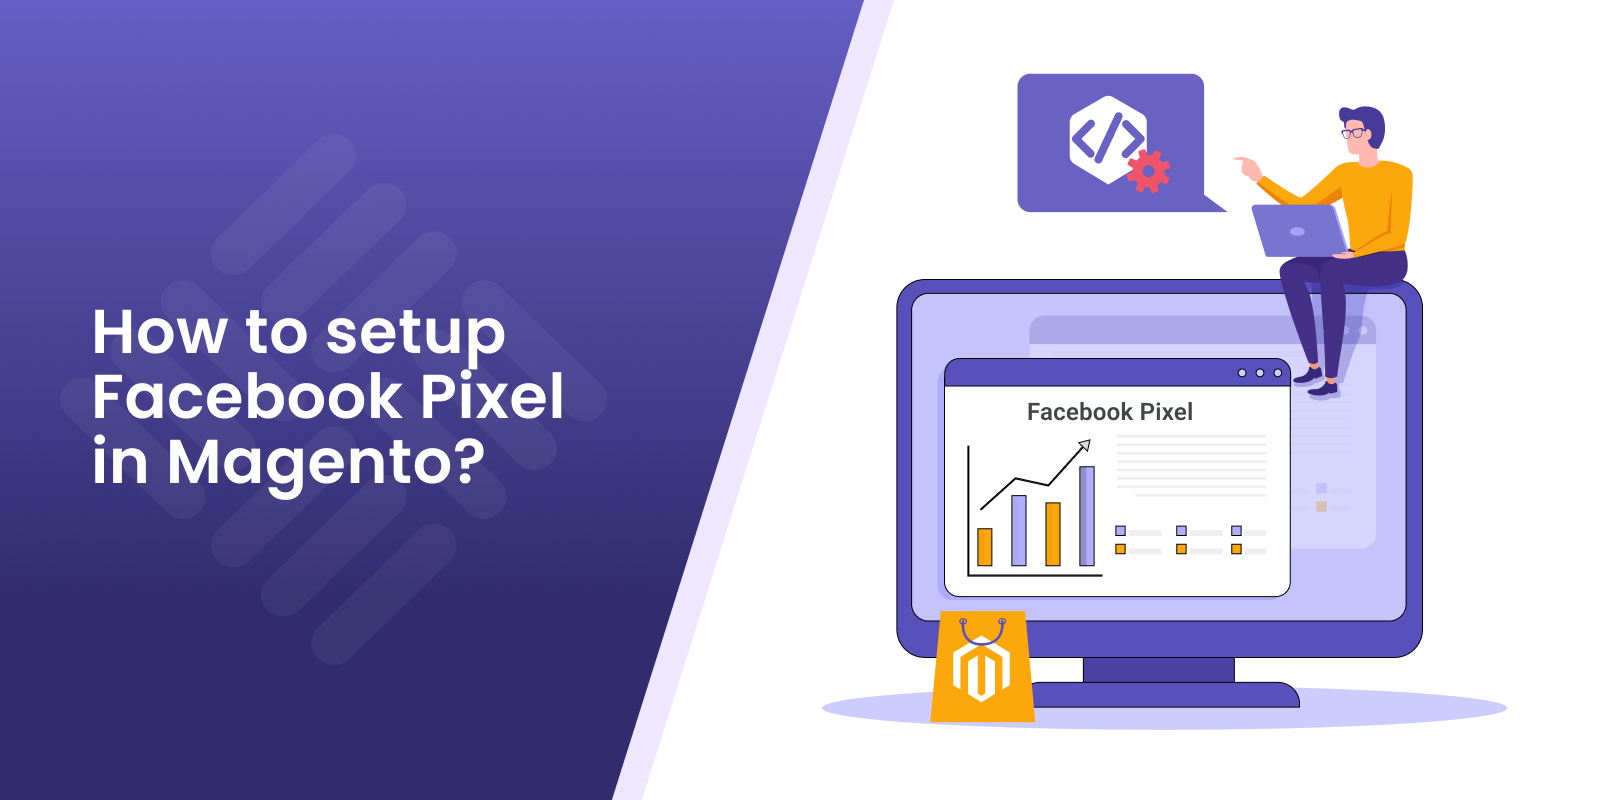 How to setup Facebook Pixel in Magento